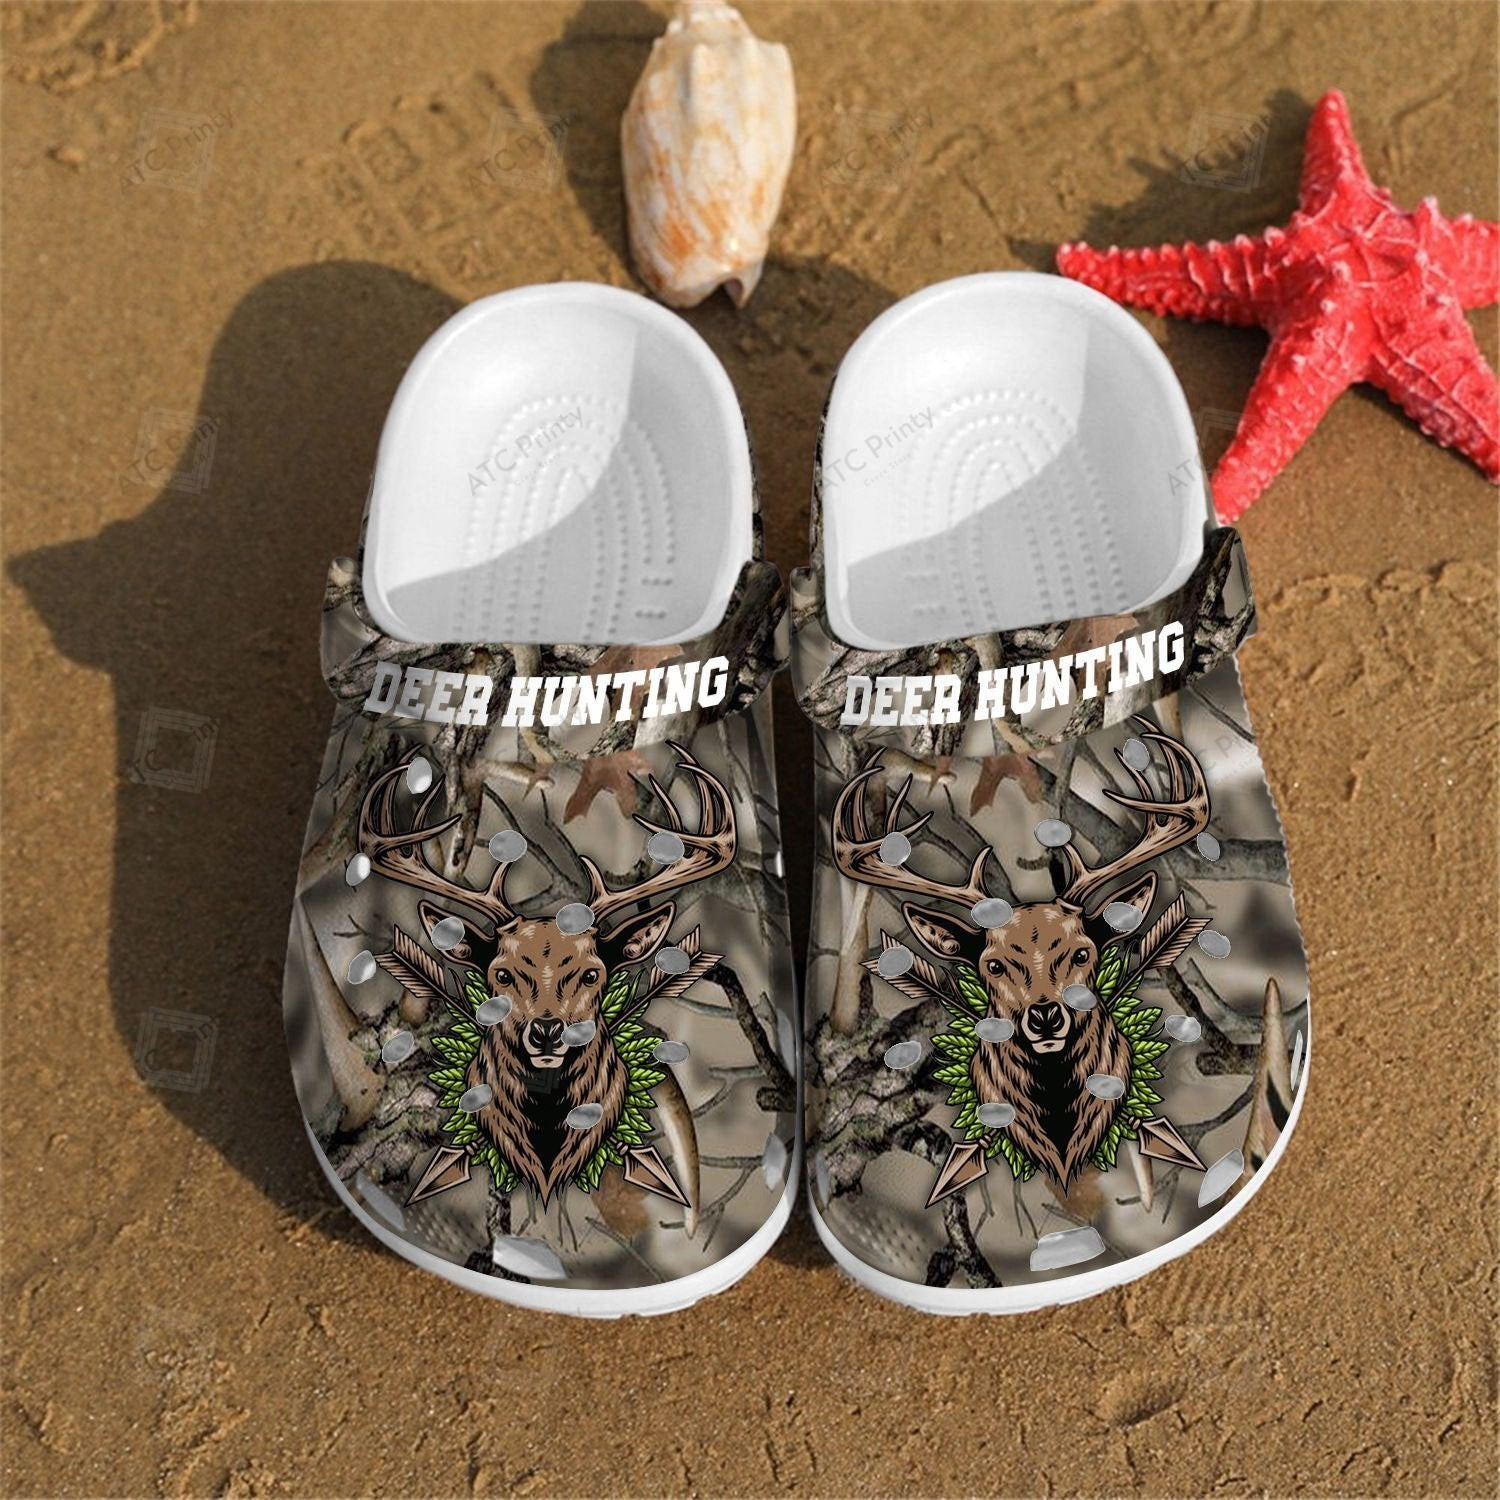 Deer Hunting Croc Shoes For Men - Deer Shoes Crocbland Clog Gifts For Father Day